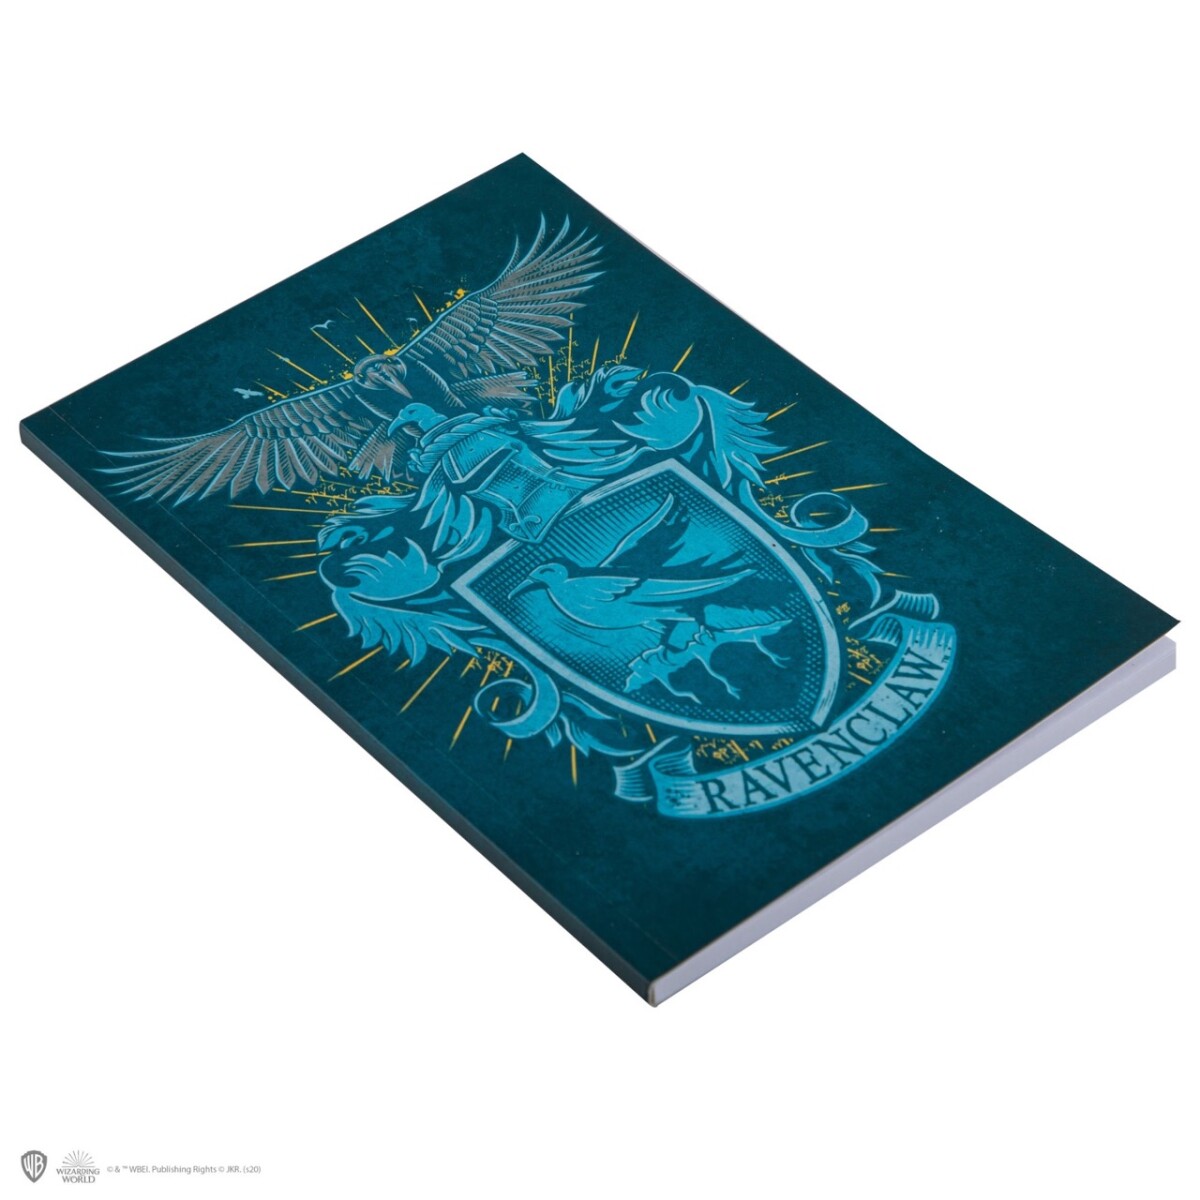 Harry Potter - Cuaderno - Ravenclaw 